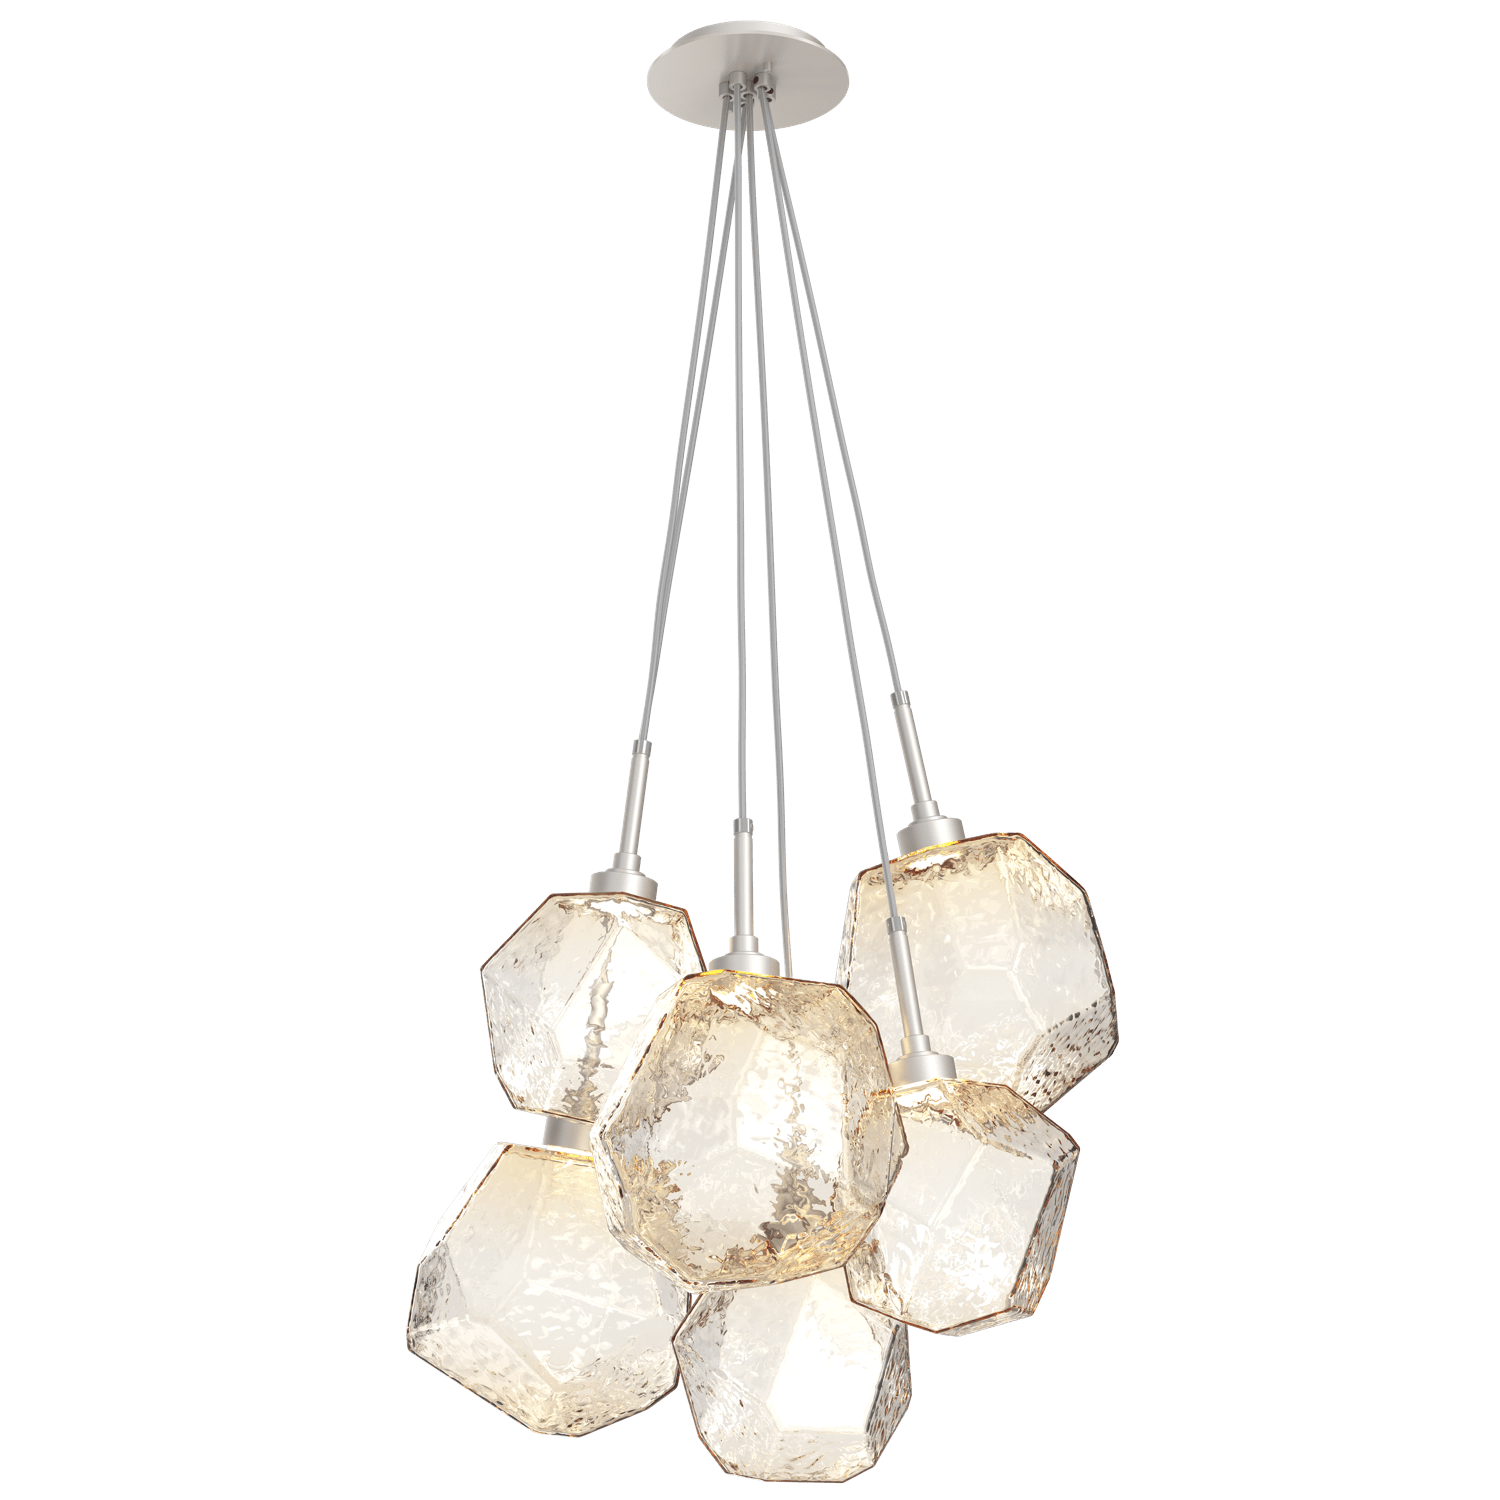 CHB0039-0F-BS-A-Hammerton-Studio-Gem-6-light-cluster-pendant-light-with-metallic-beige-silver-finish-and-amber-blown-glass-shades-and-LED-lamping